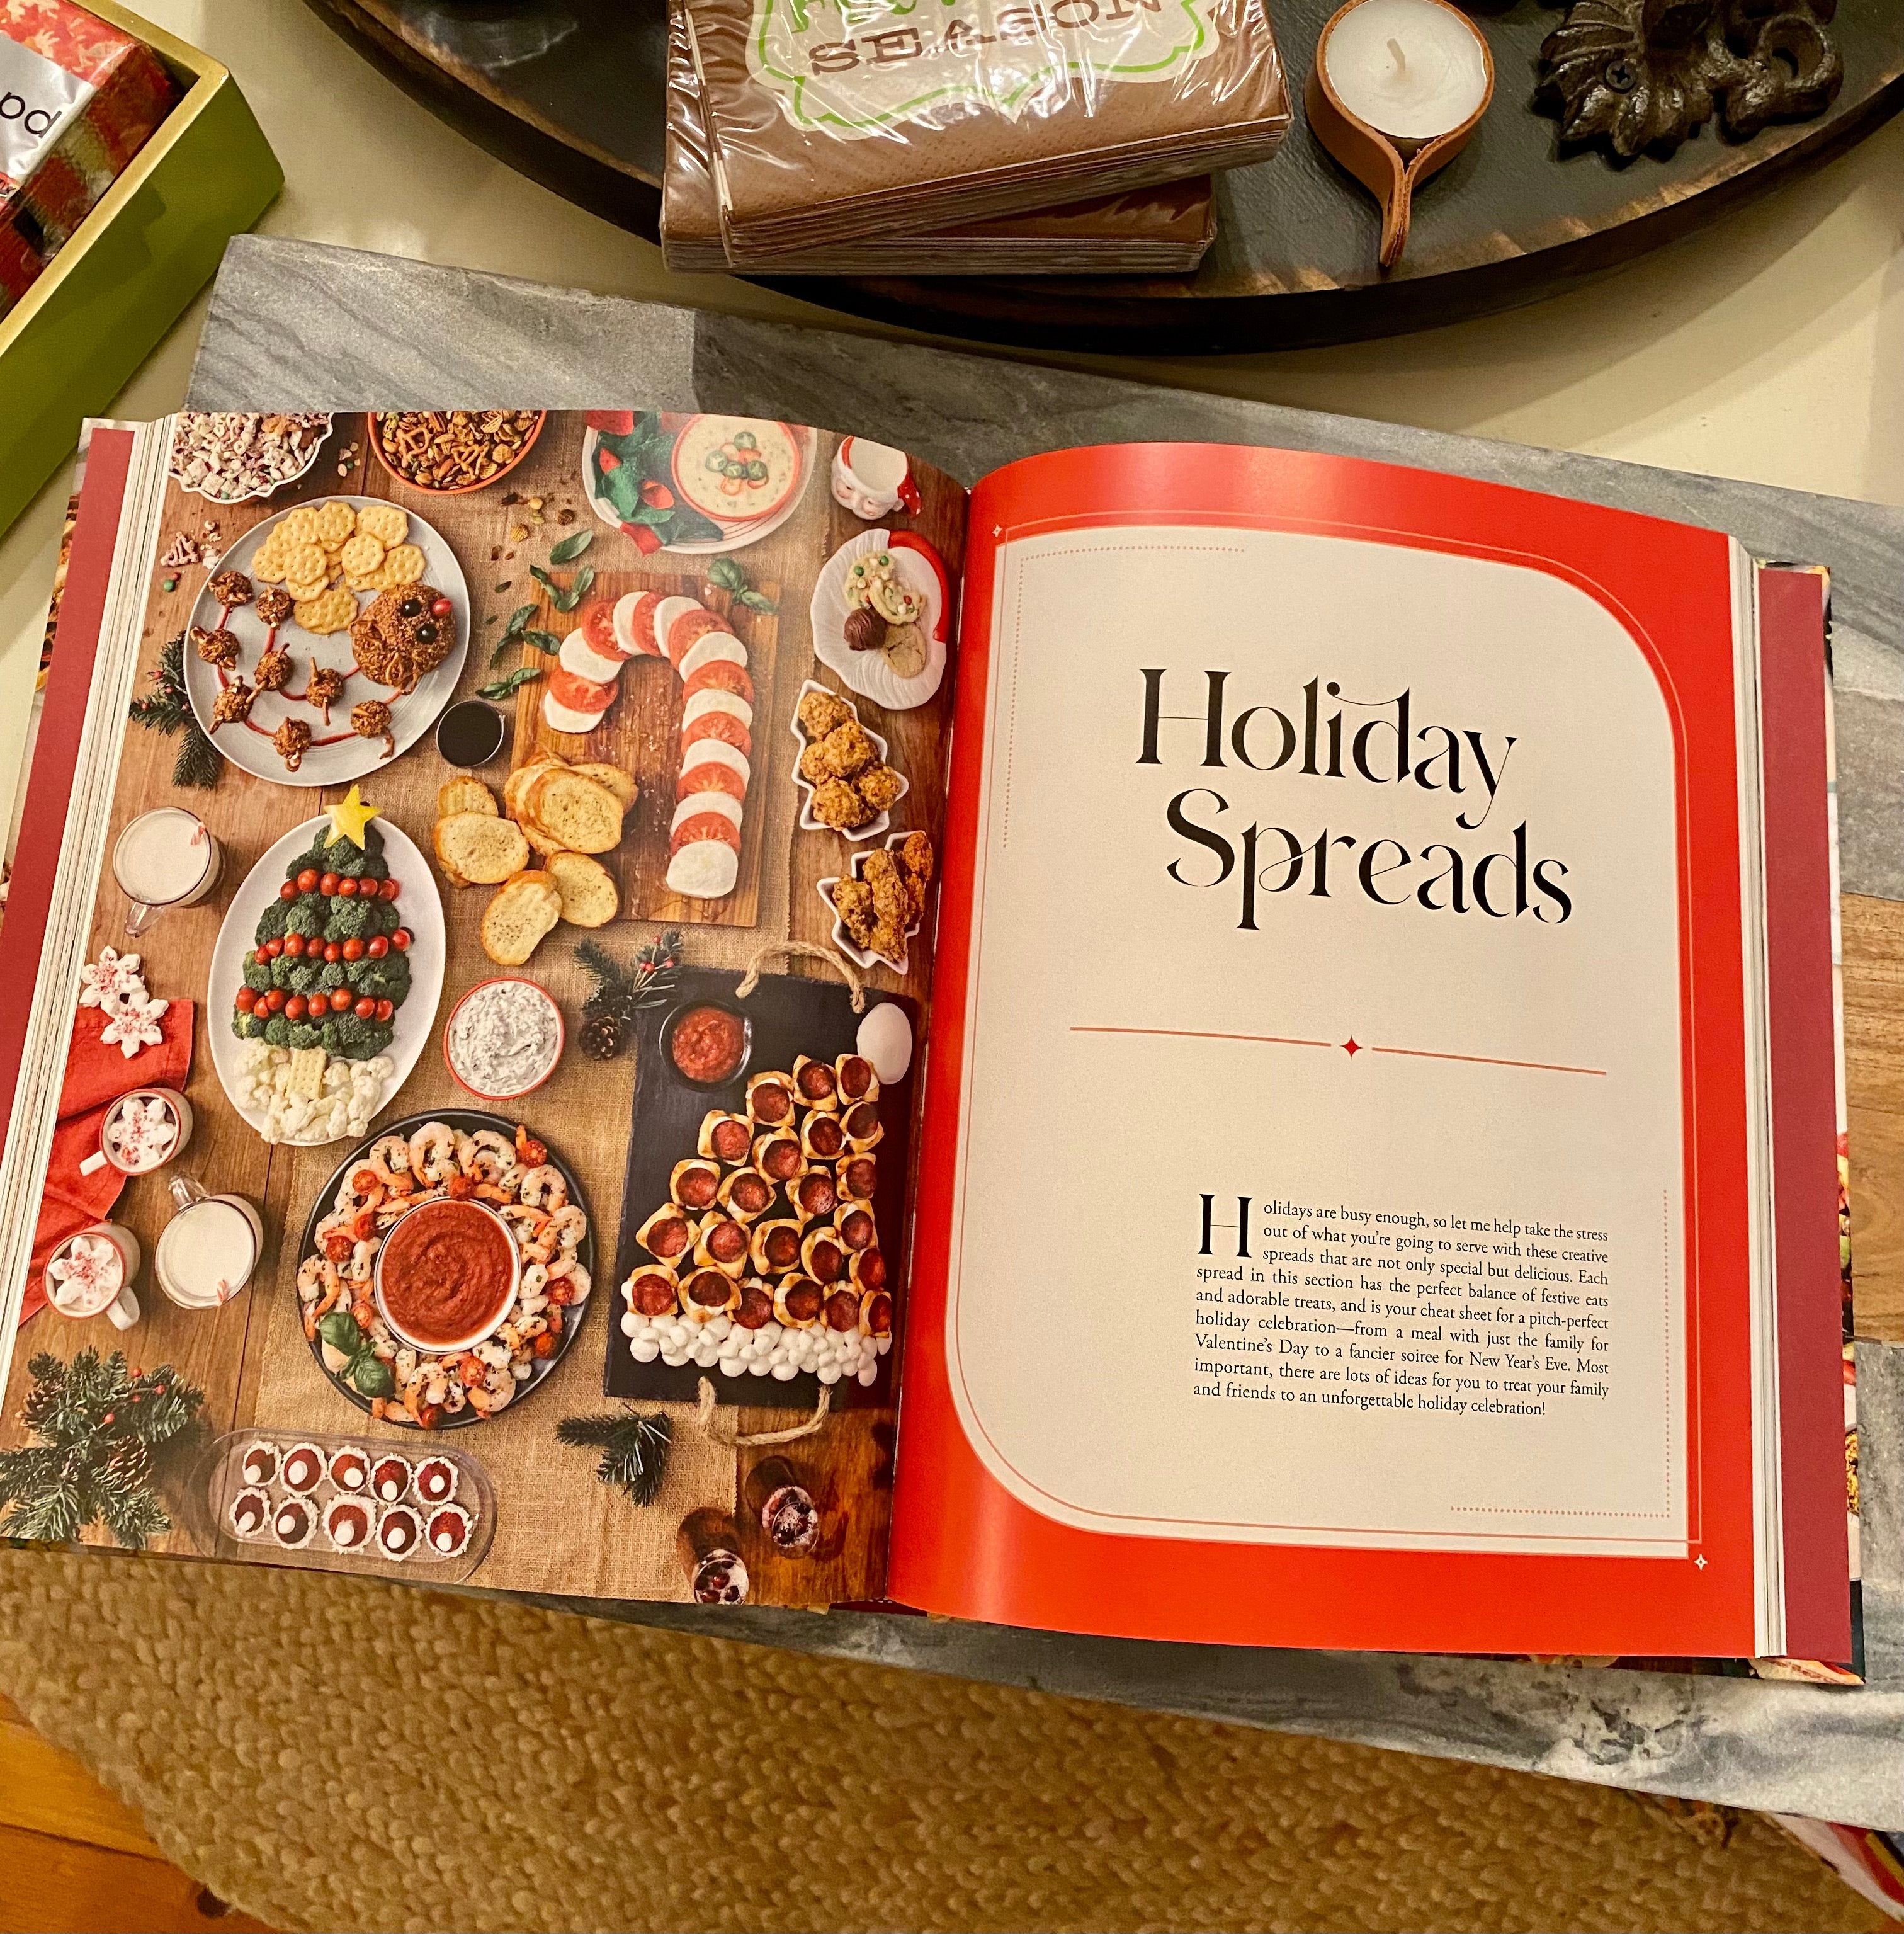 Spectacular Spreads by Meagan Brown